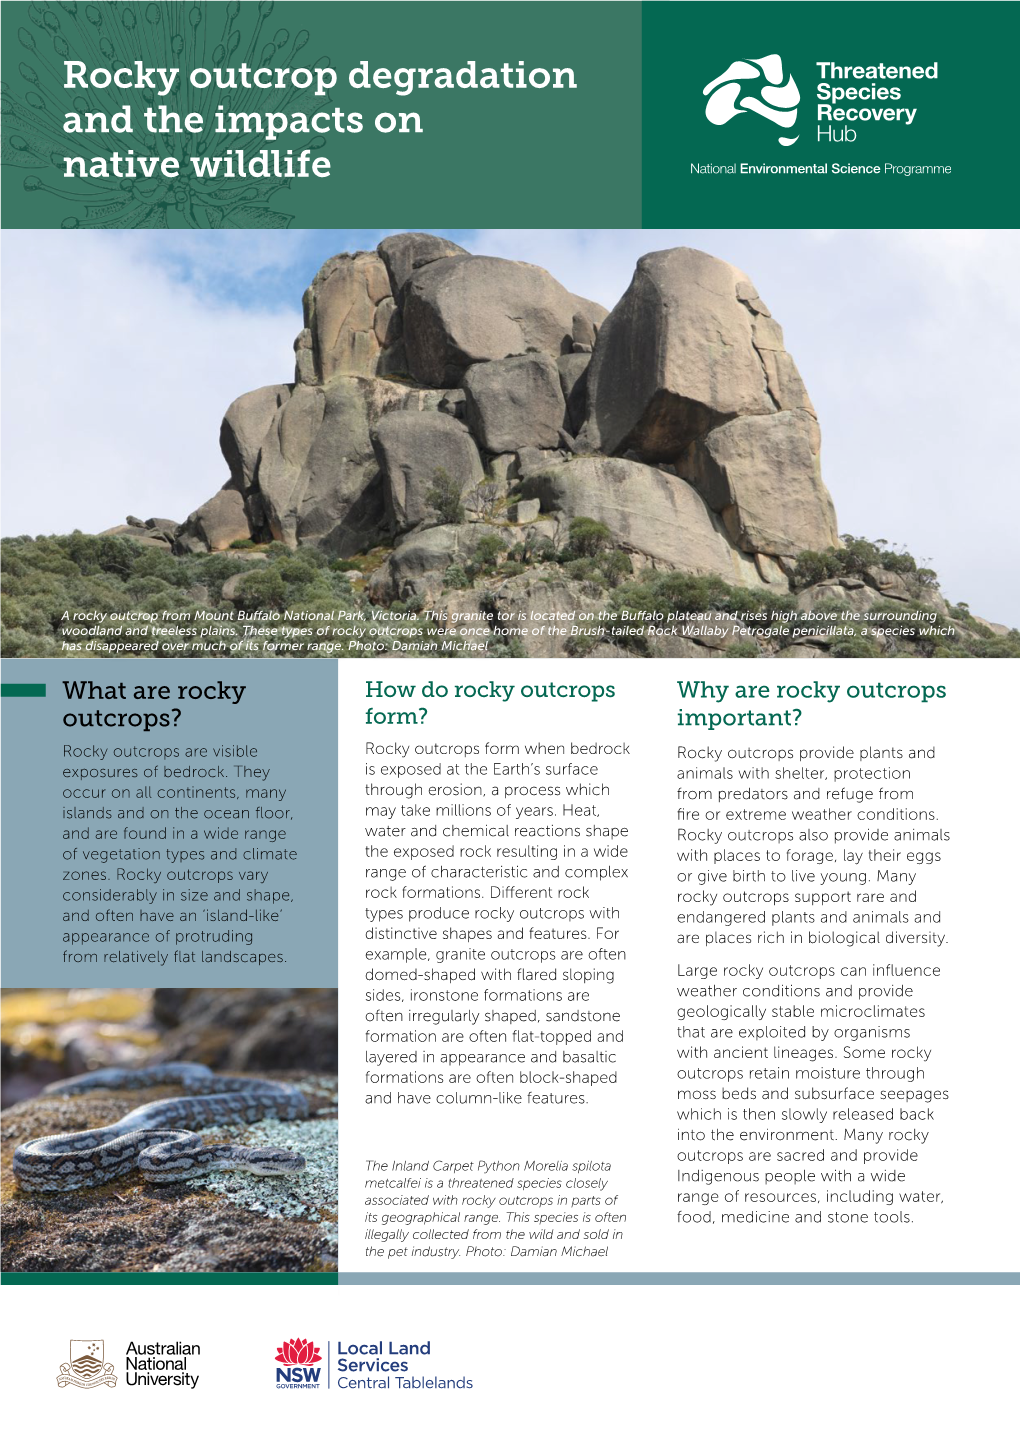 Rocky Outcrop Degradation and the Impacts on Native Wildlife